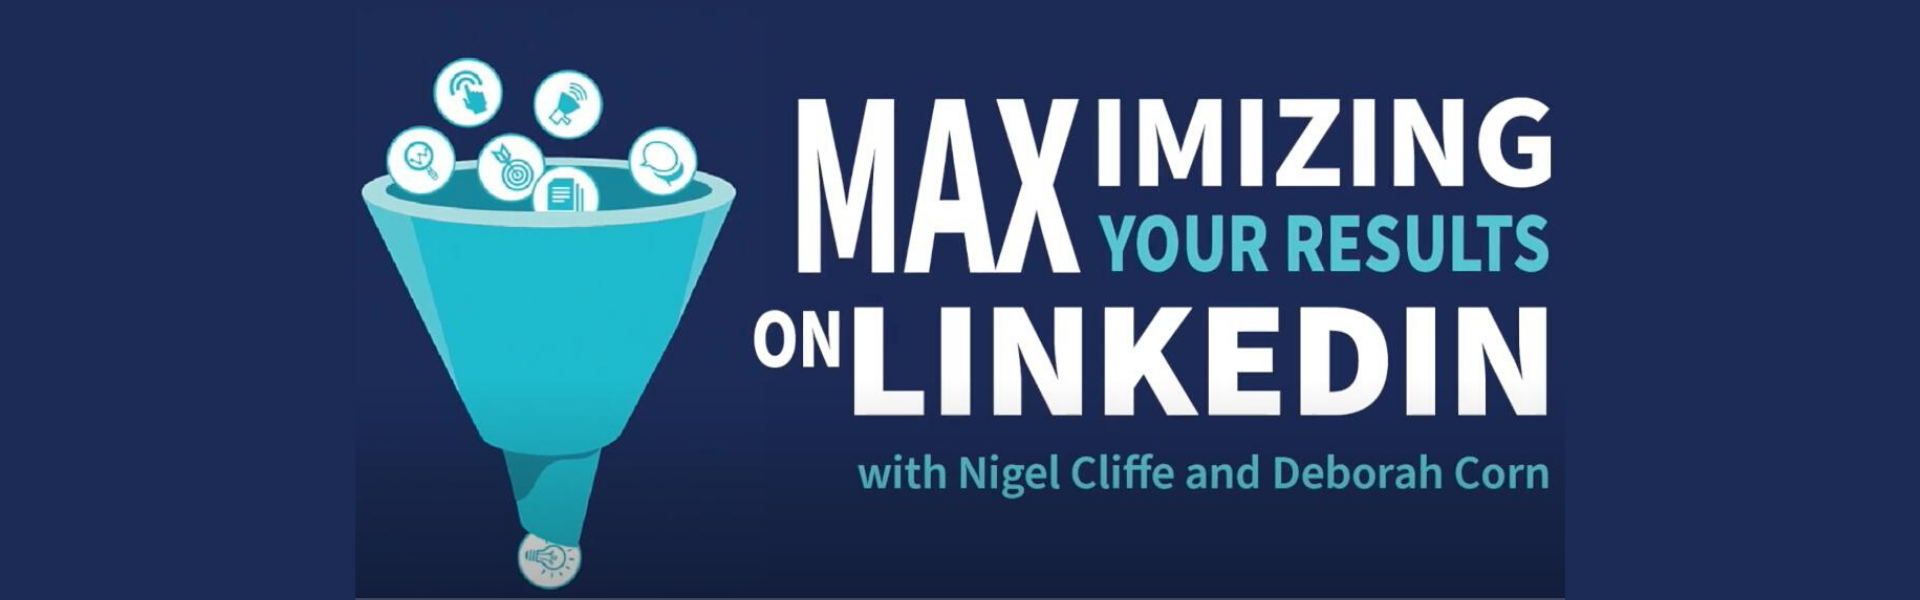 how to grow your network on LinkedIn - Nigel Cliffe and Deborah Corn live Q&A